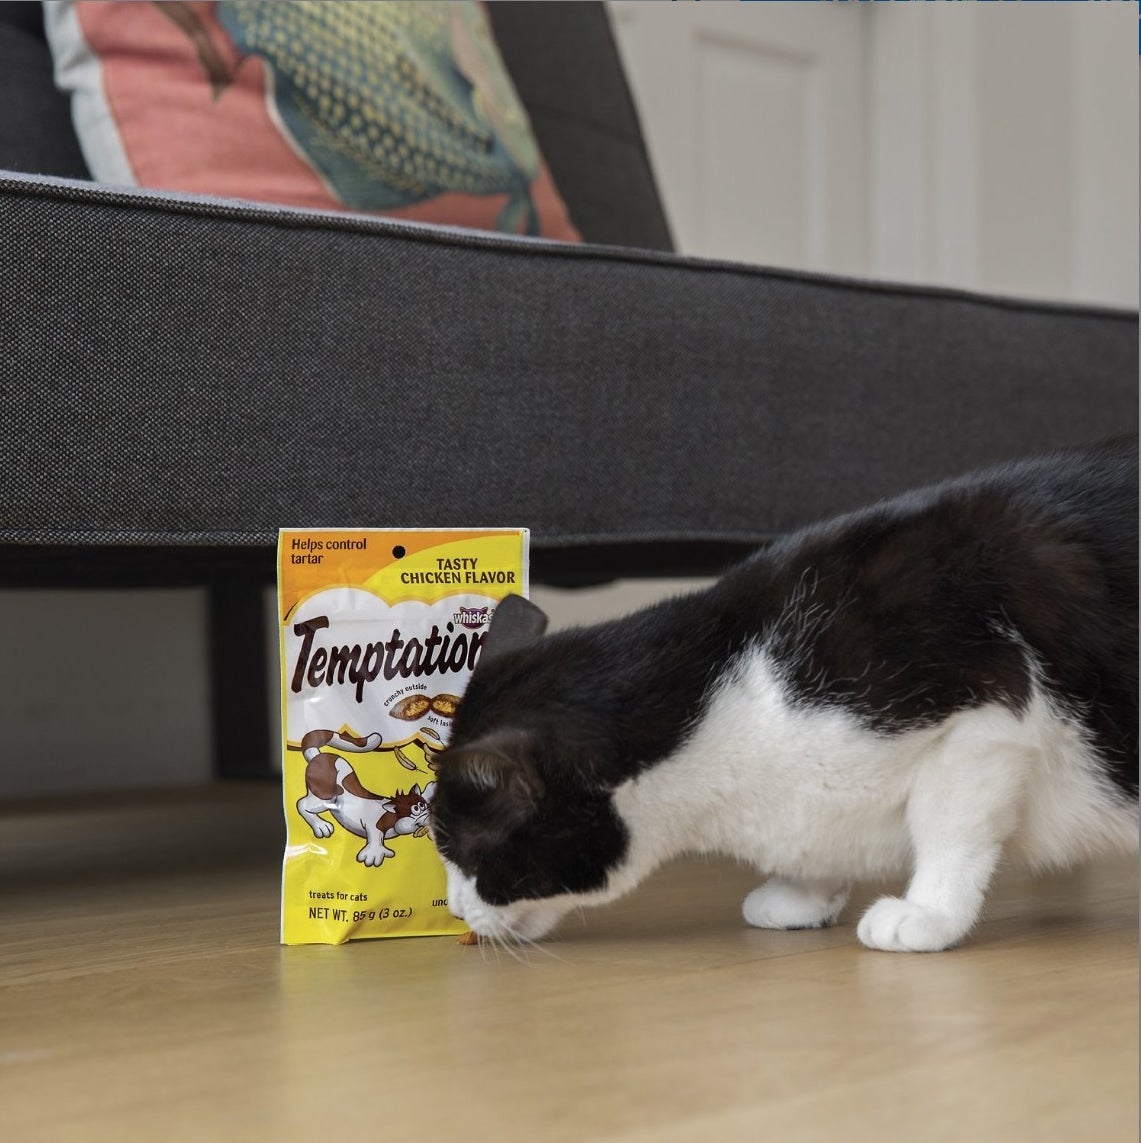 Black and white cat eating a treat from a yellow bag